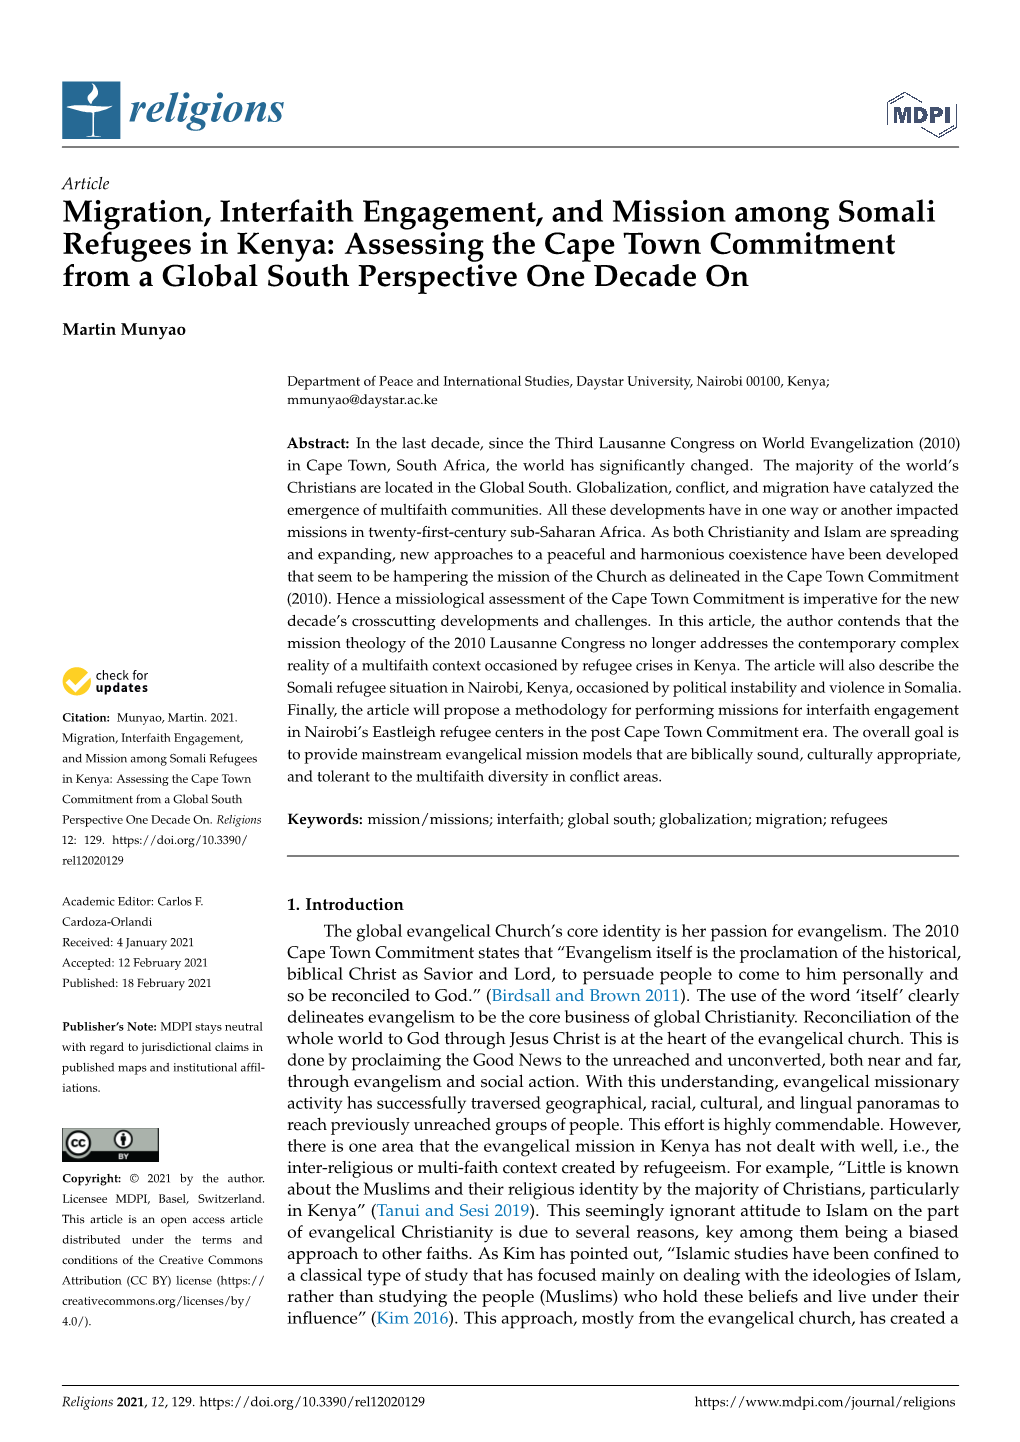 Migration, Interfaith Engagement, and Mission Among Somali Refugees in Kenya: Assessing the Cape Town Commitment from a Global South Perspective One Decade On